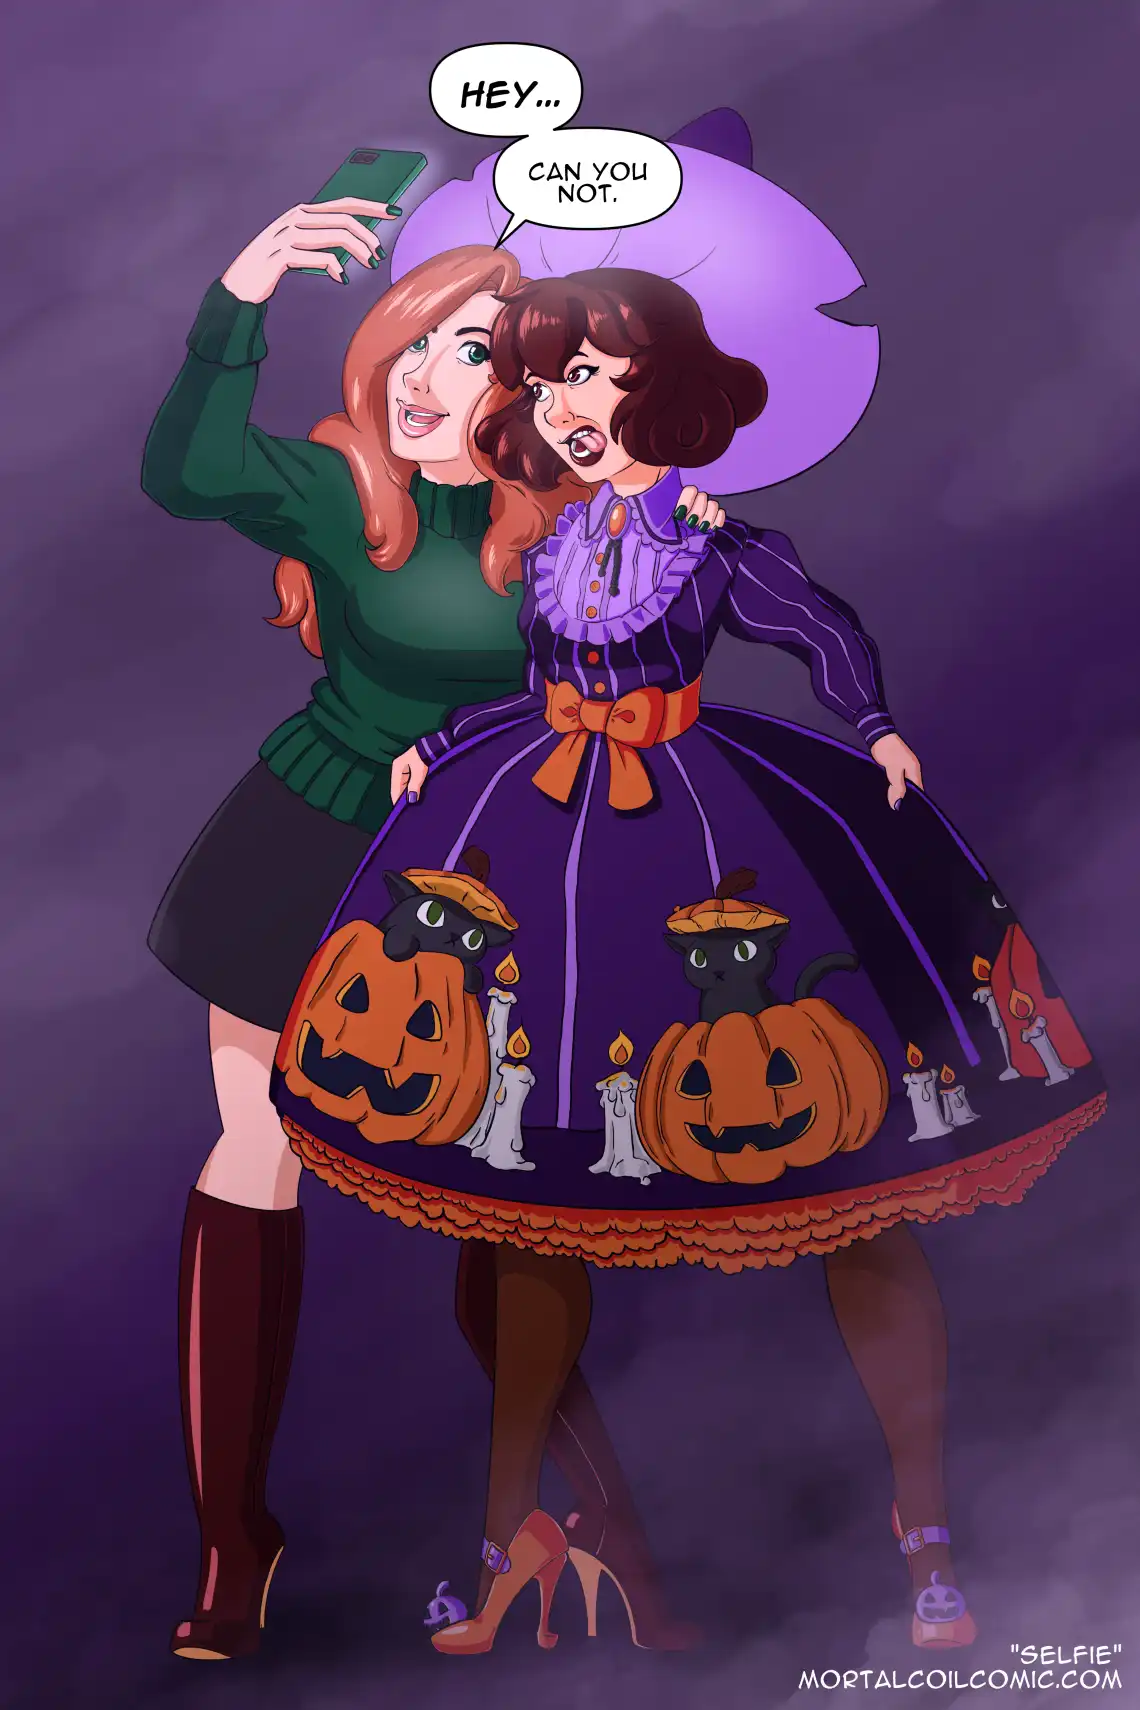 Hey... Can you not? Kitty and Witches for Halloween 2020!